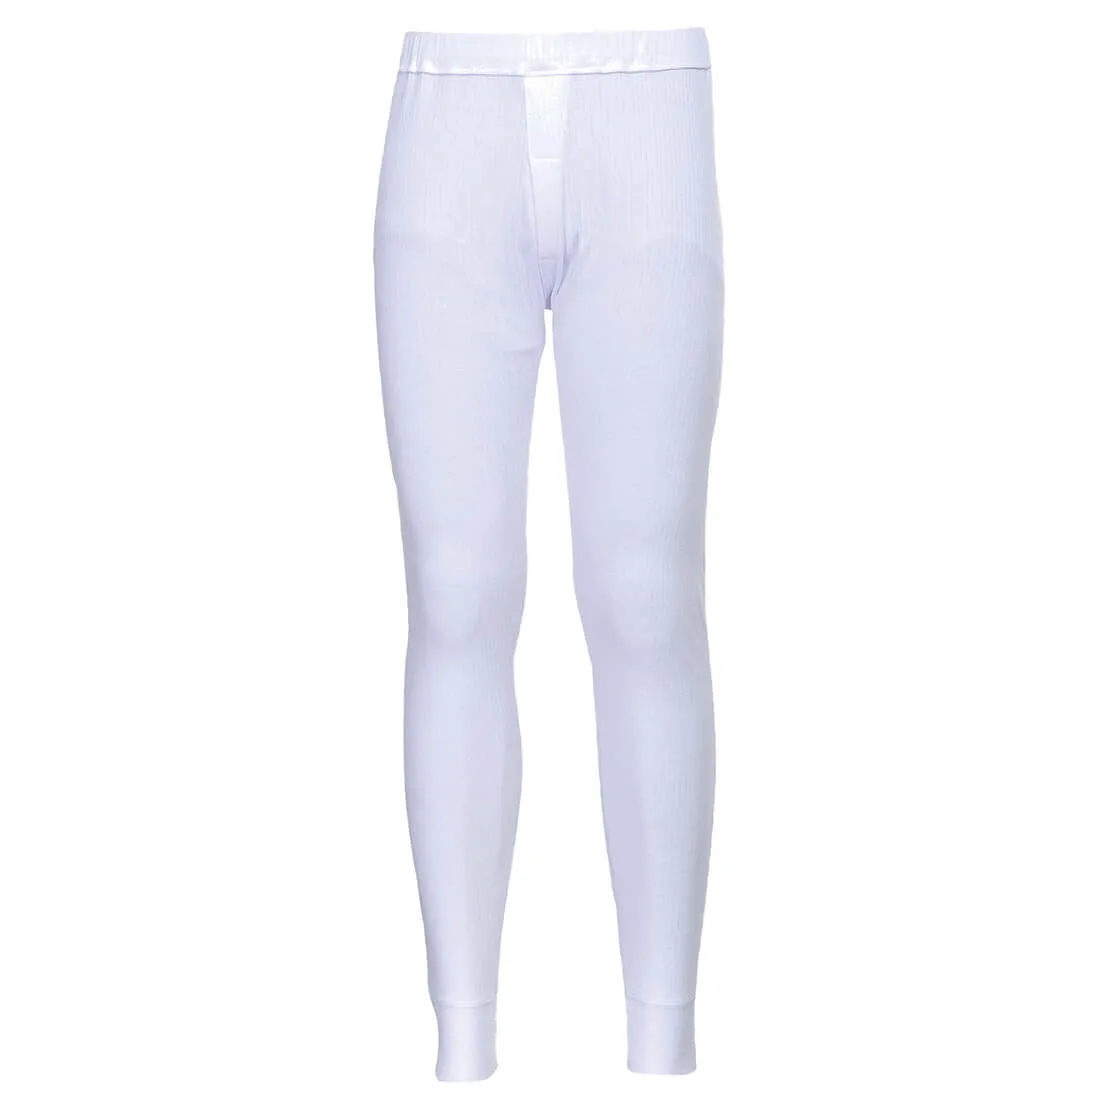 Portwest Thermal Trousers - White, L